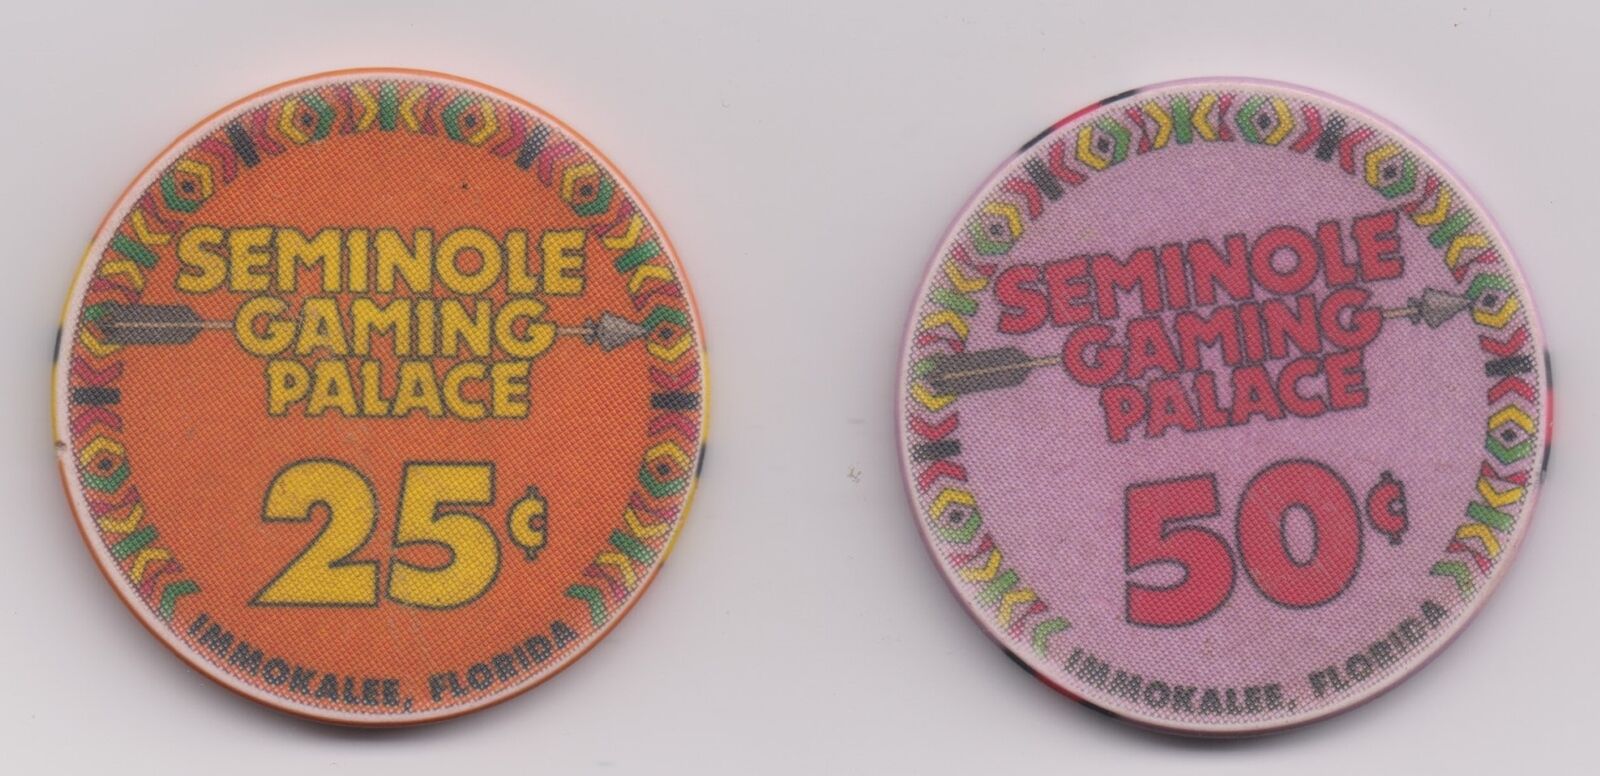 25 Cent & 50 Cent Seminole Gaming Palace Immokalee FL.Chips 2019